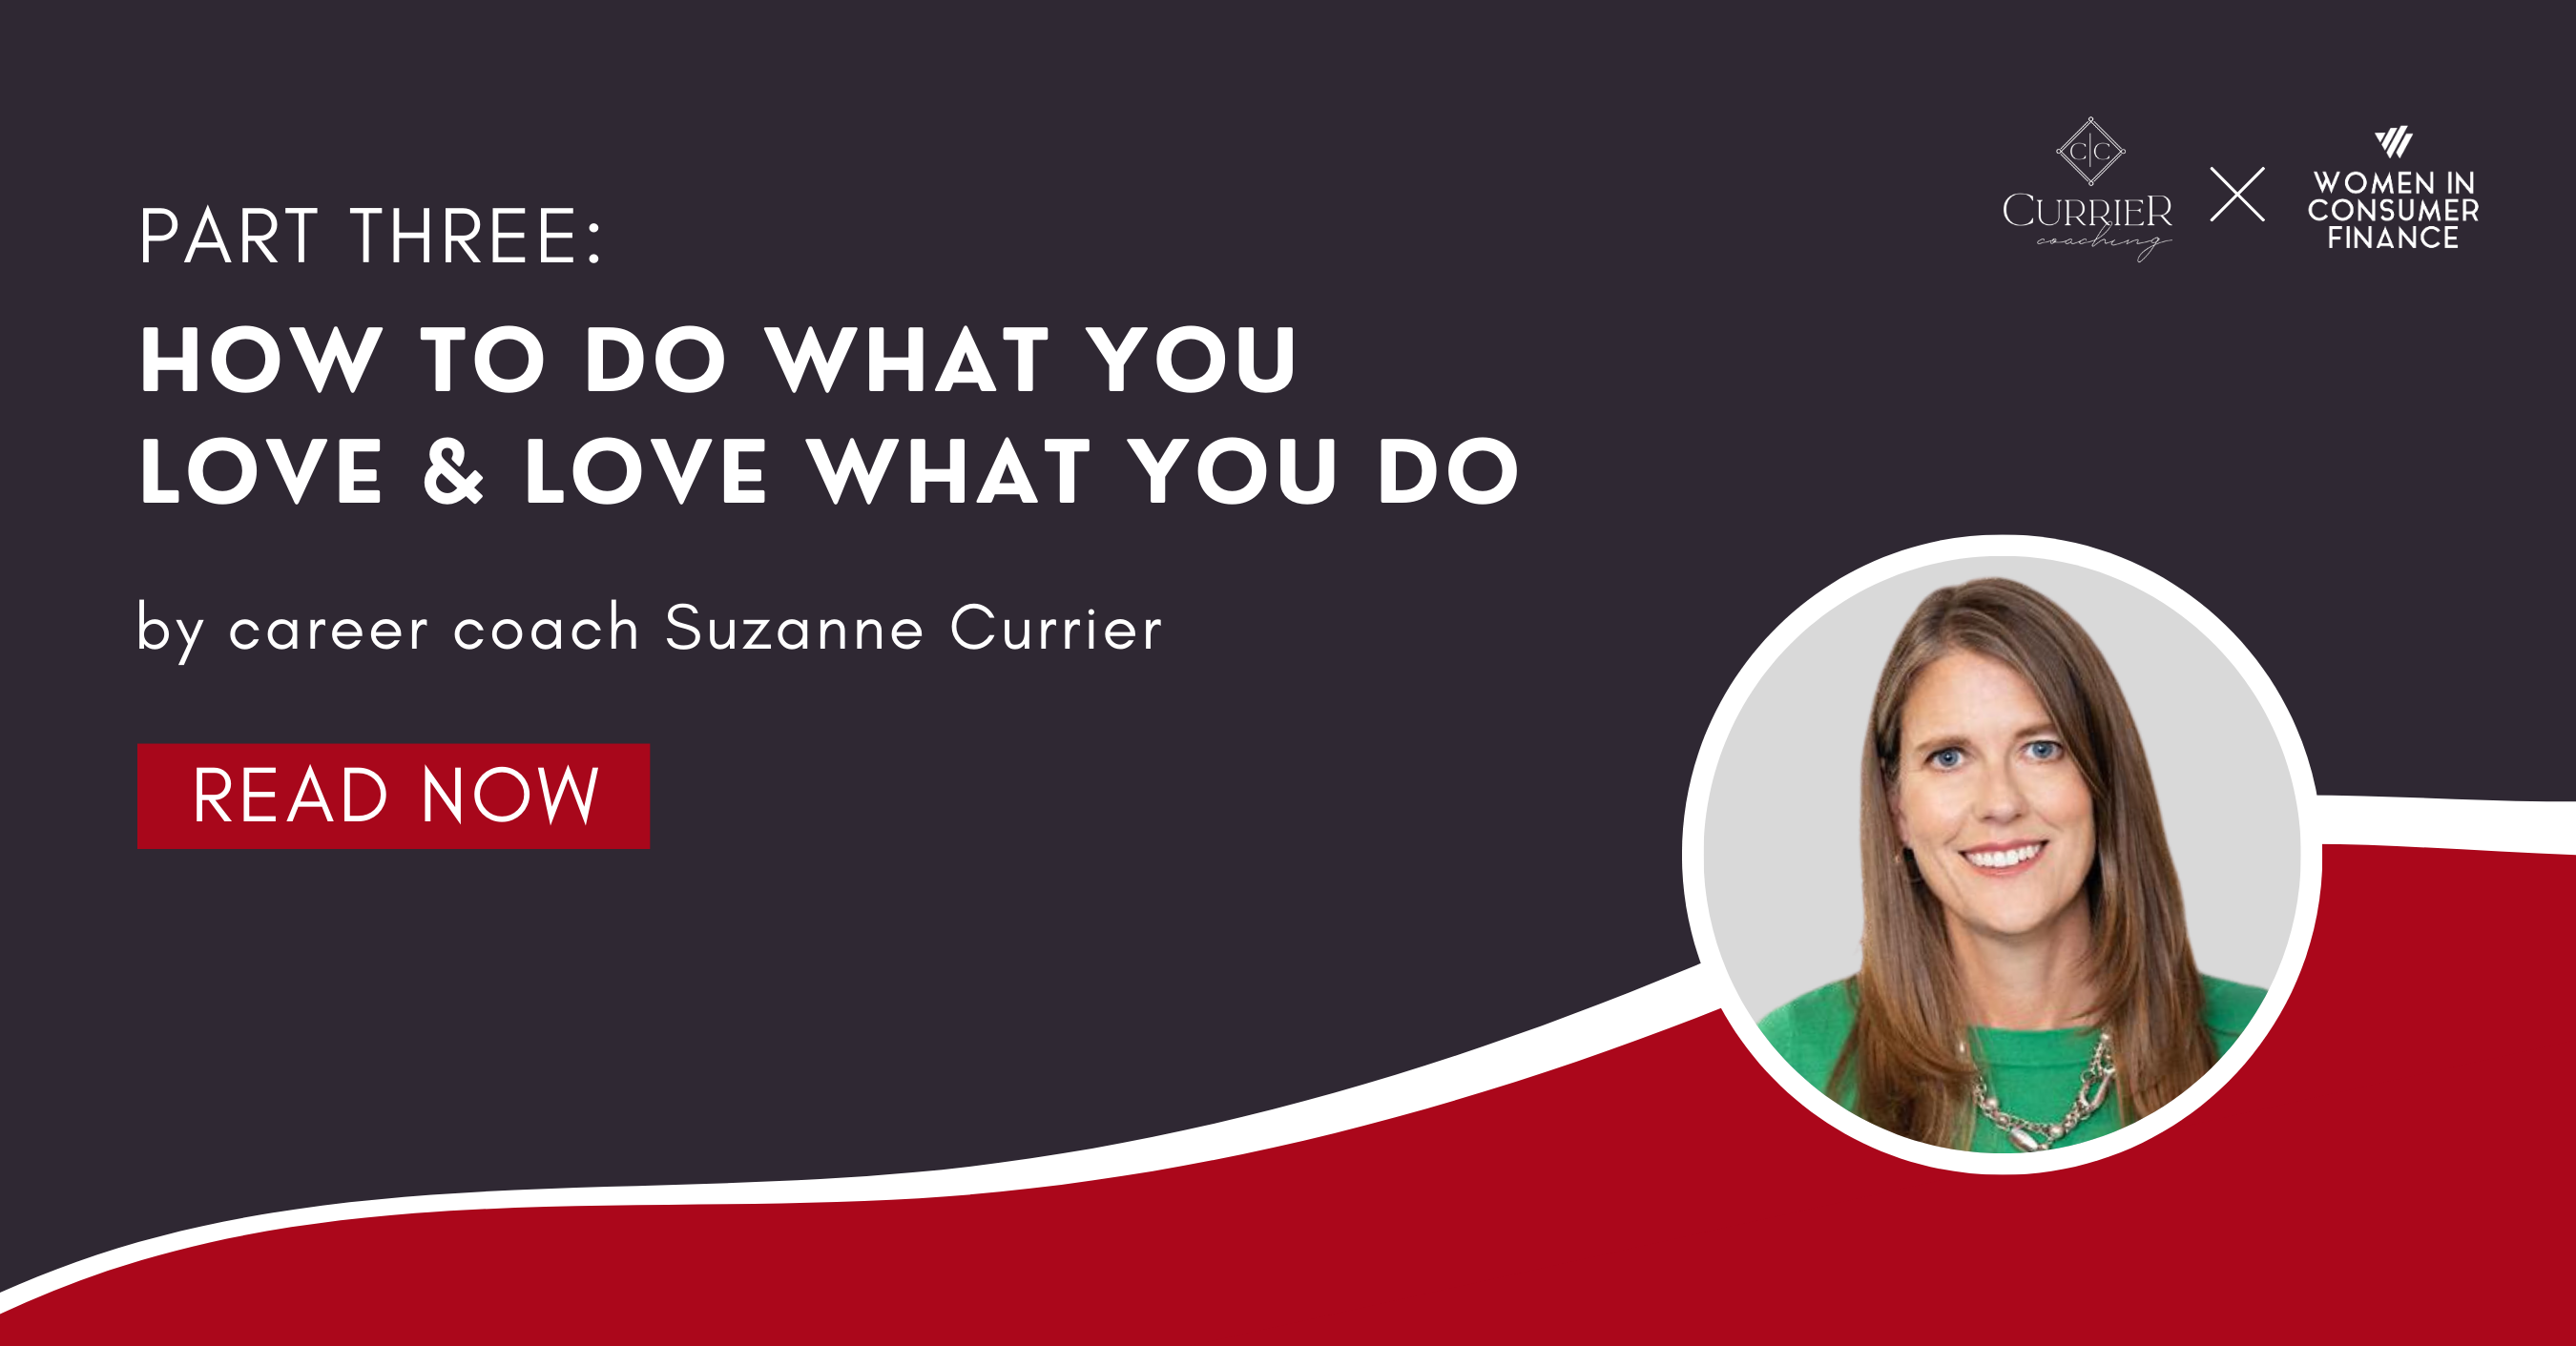 Part 3: How to Do What You Love & Love What You Do